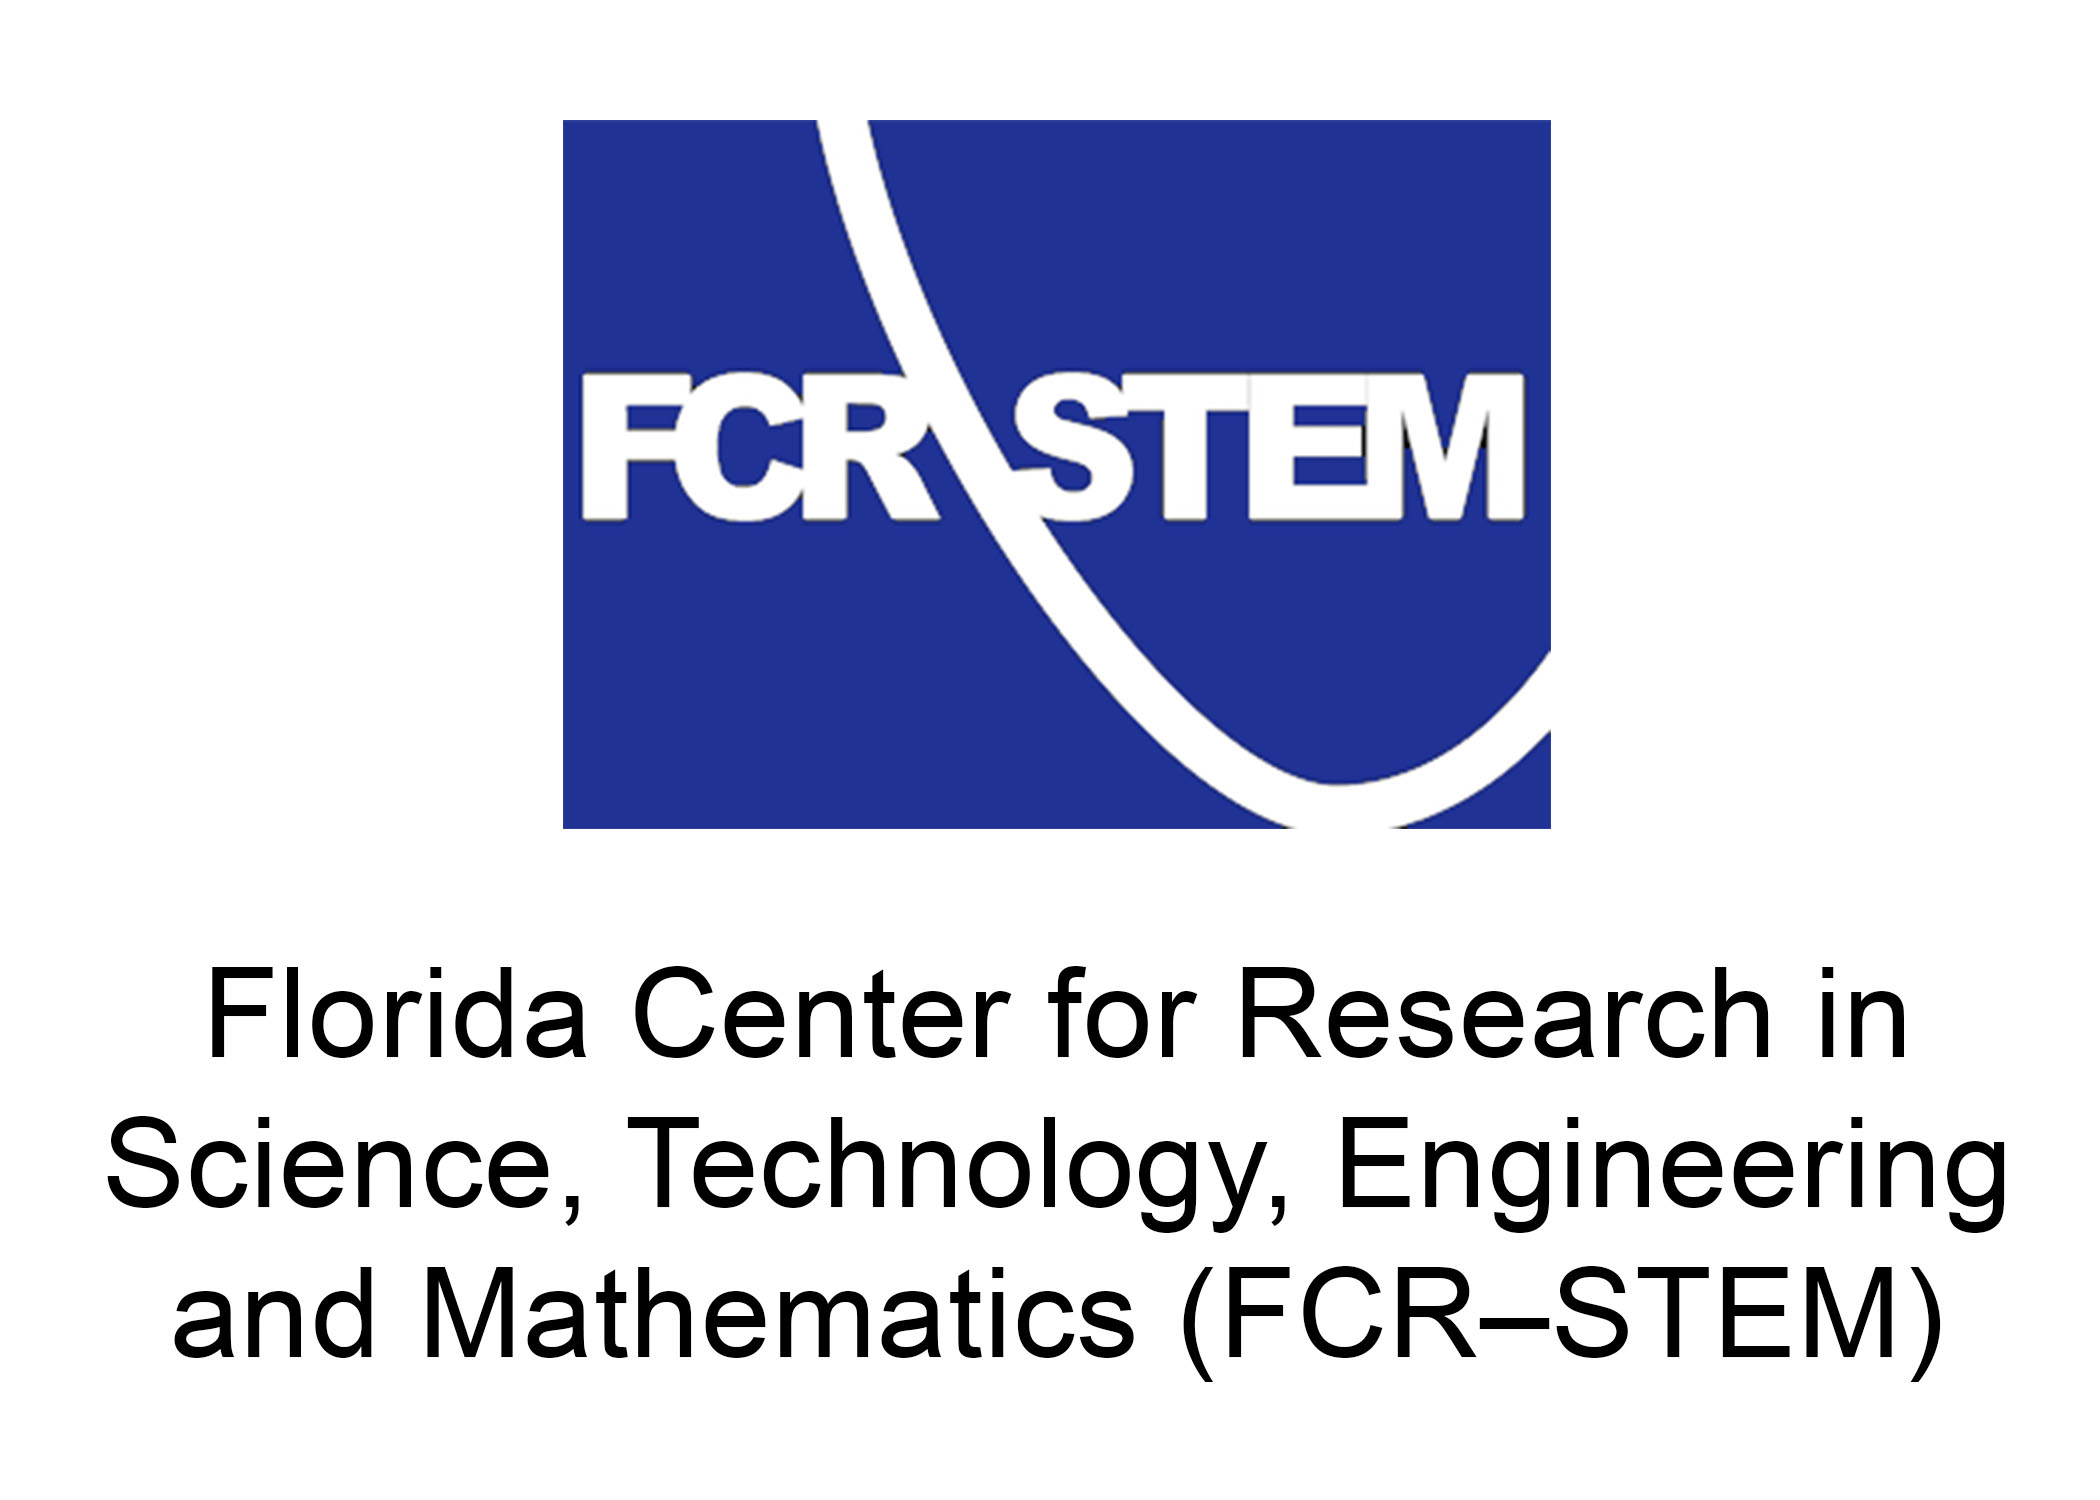 Florida Center for Research in Science, Technology, Engineering & Mathematics (STEM)